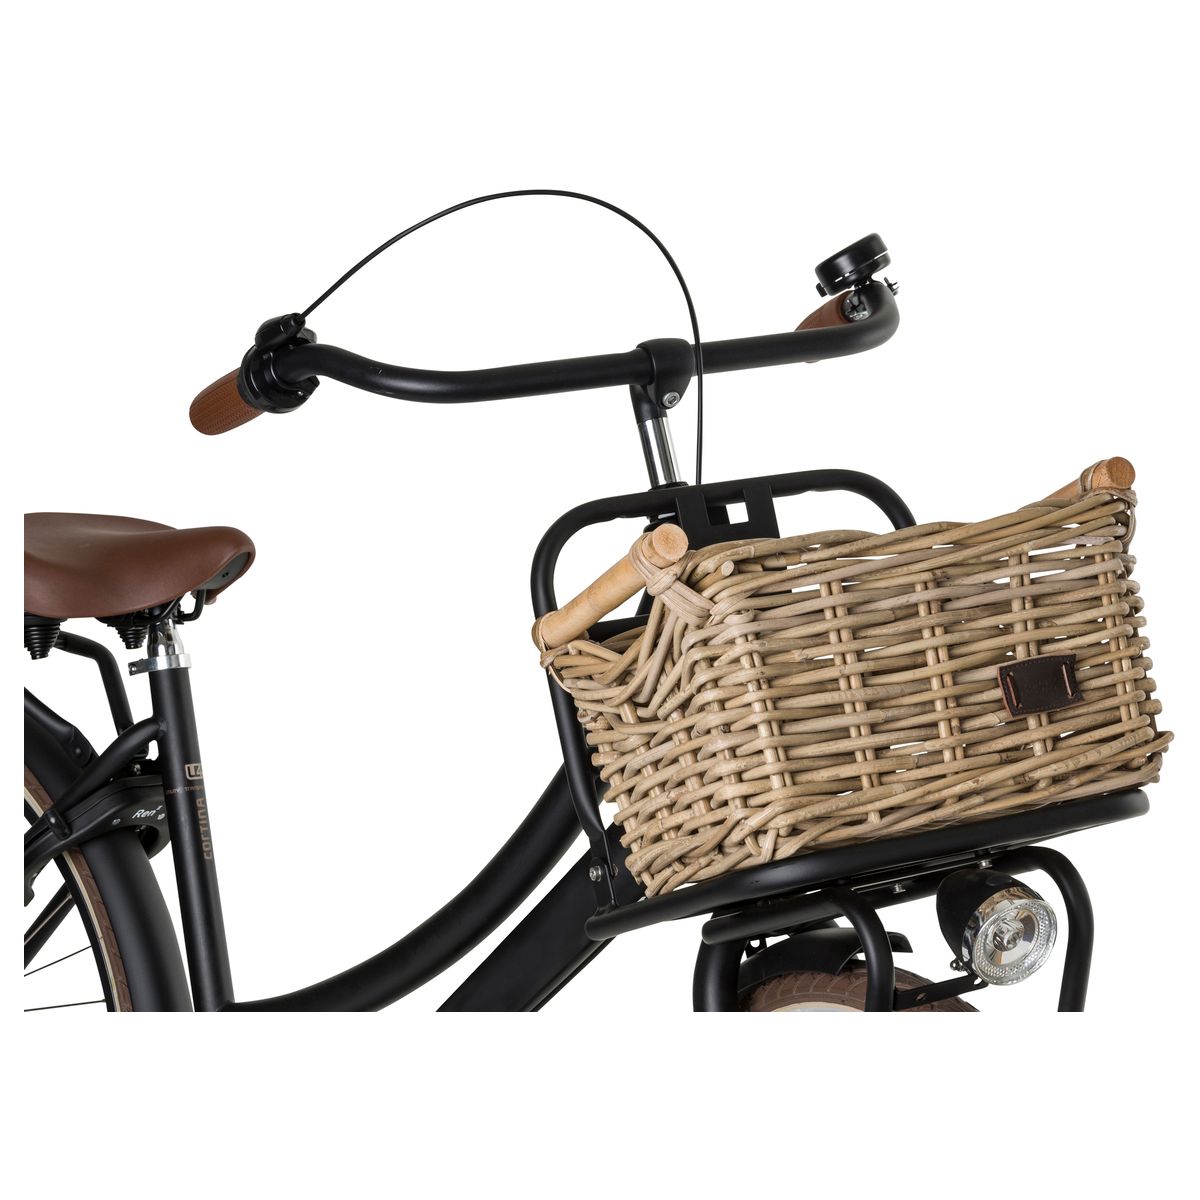 Fastrider Bamboo Rattan Bike Basket fit example